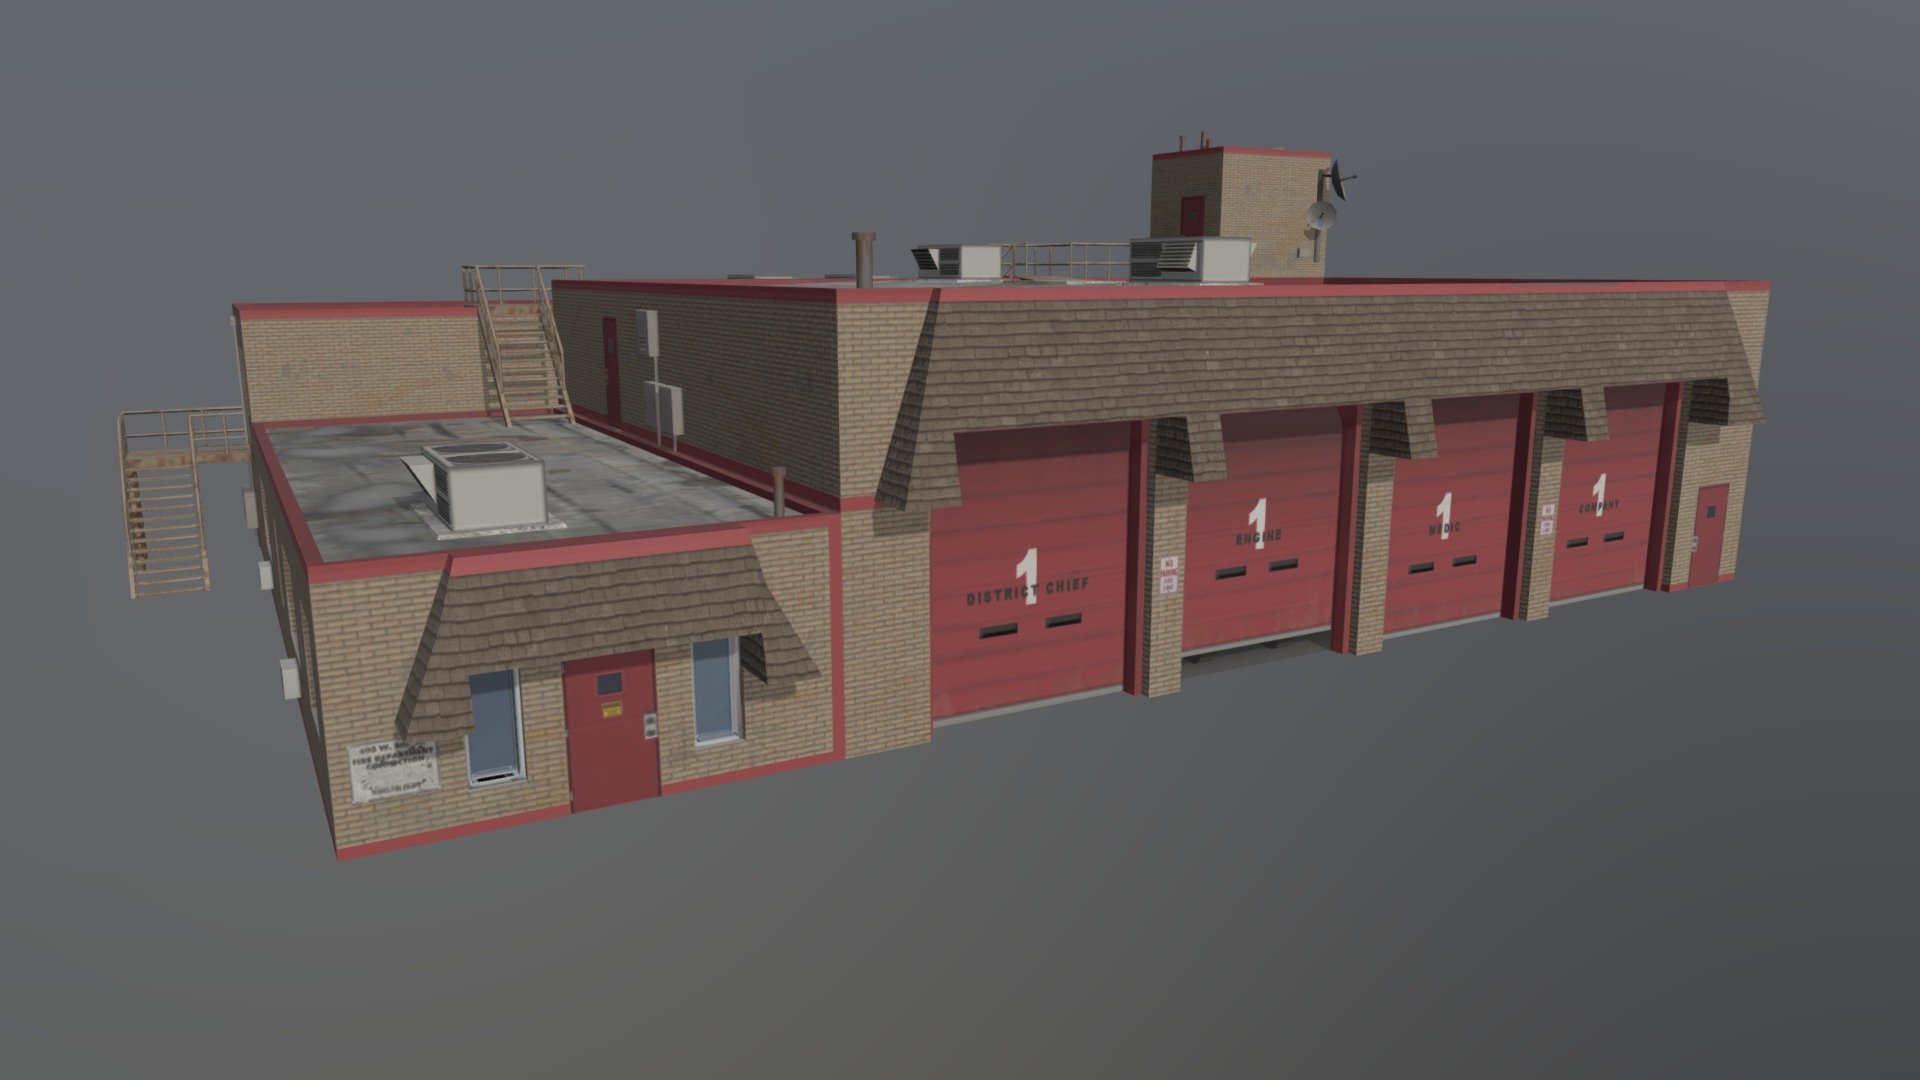 Suburban American fire station for Cities:Skylines. Based on a station of West Metro Fire Rescue in Lakewood, Colorado.

This was the first model I made for Cities:Skylines, in 2016. Since then I learned a lot more about authoring textures so that they play well with Skylines' lighting/renderer, so I did another pass on this model before uploading it to Steam workshop 3d model